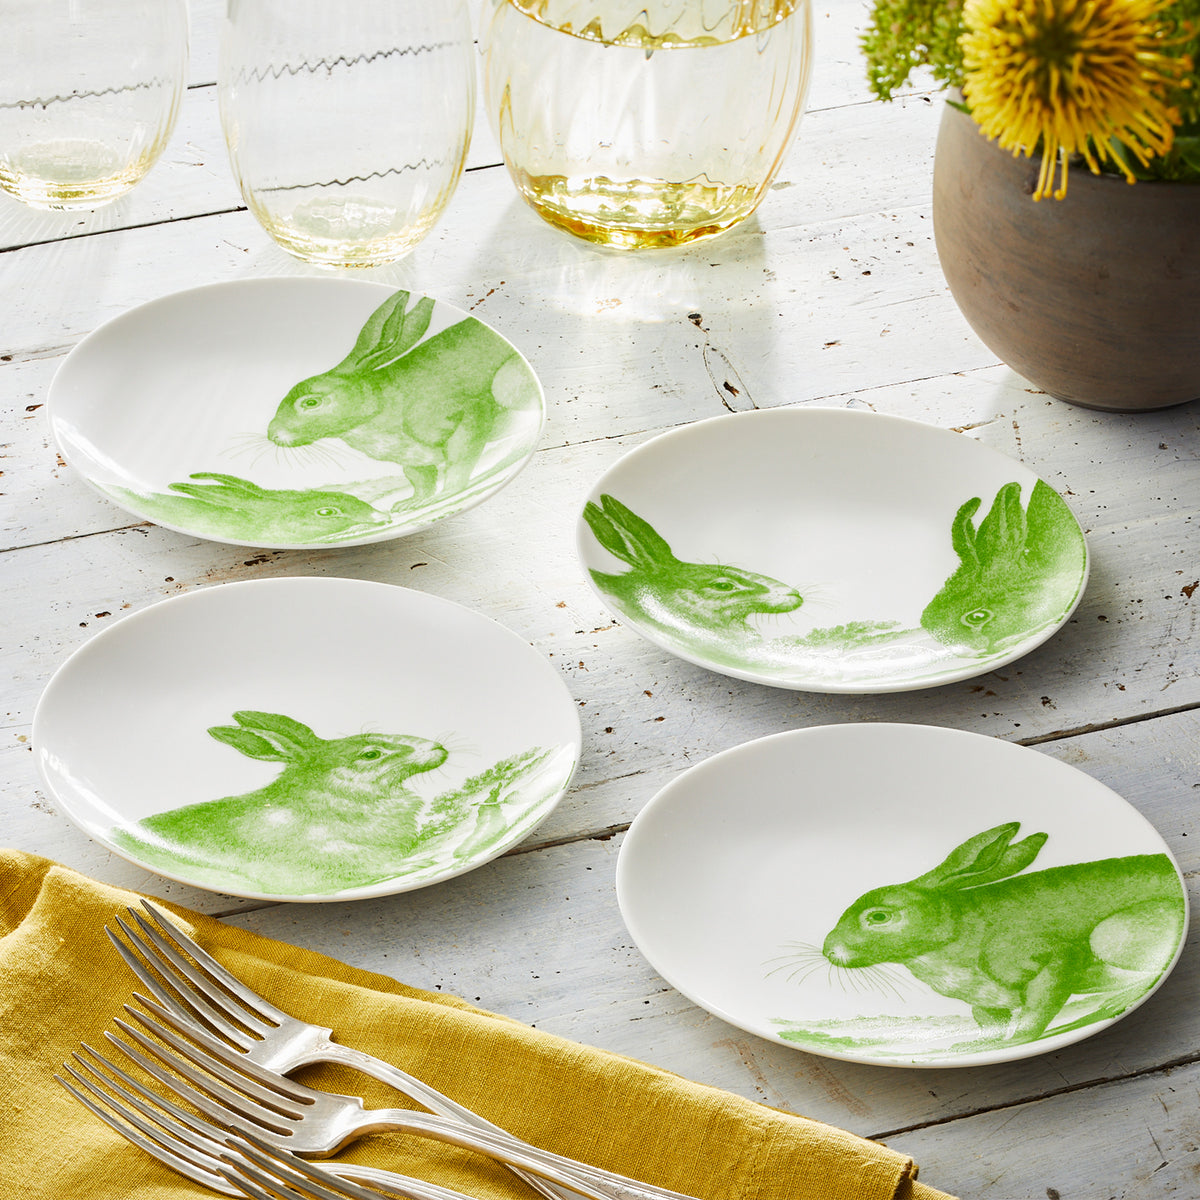 Four high-fired Caskata Bunnies Verde Small Plates with green bunny scene illustrations placed on a wooden table. Nearby are drinking glasses, a bunch of yellow flowers in a pot, a yellow napkin, and several forks.